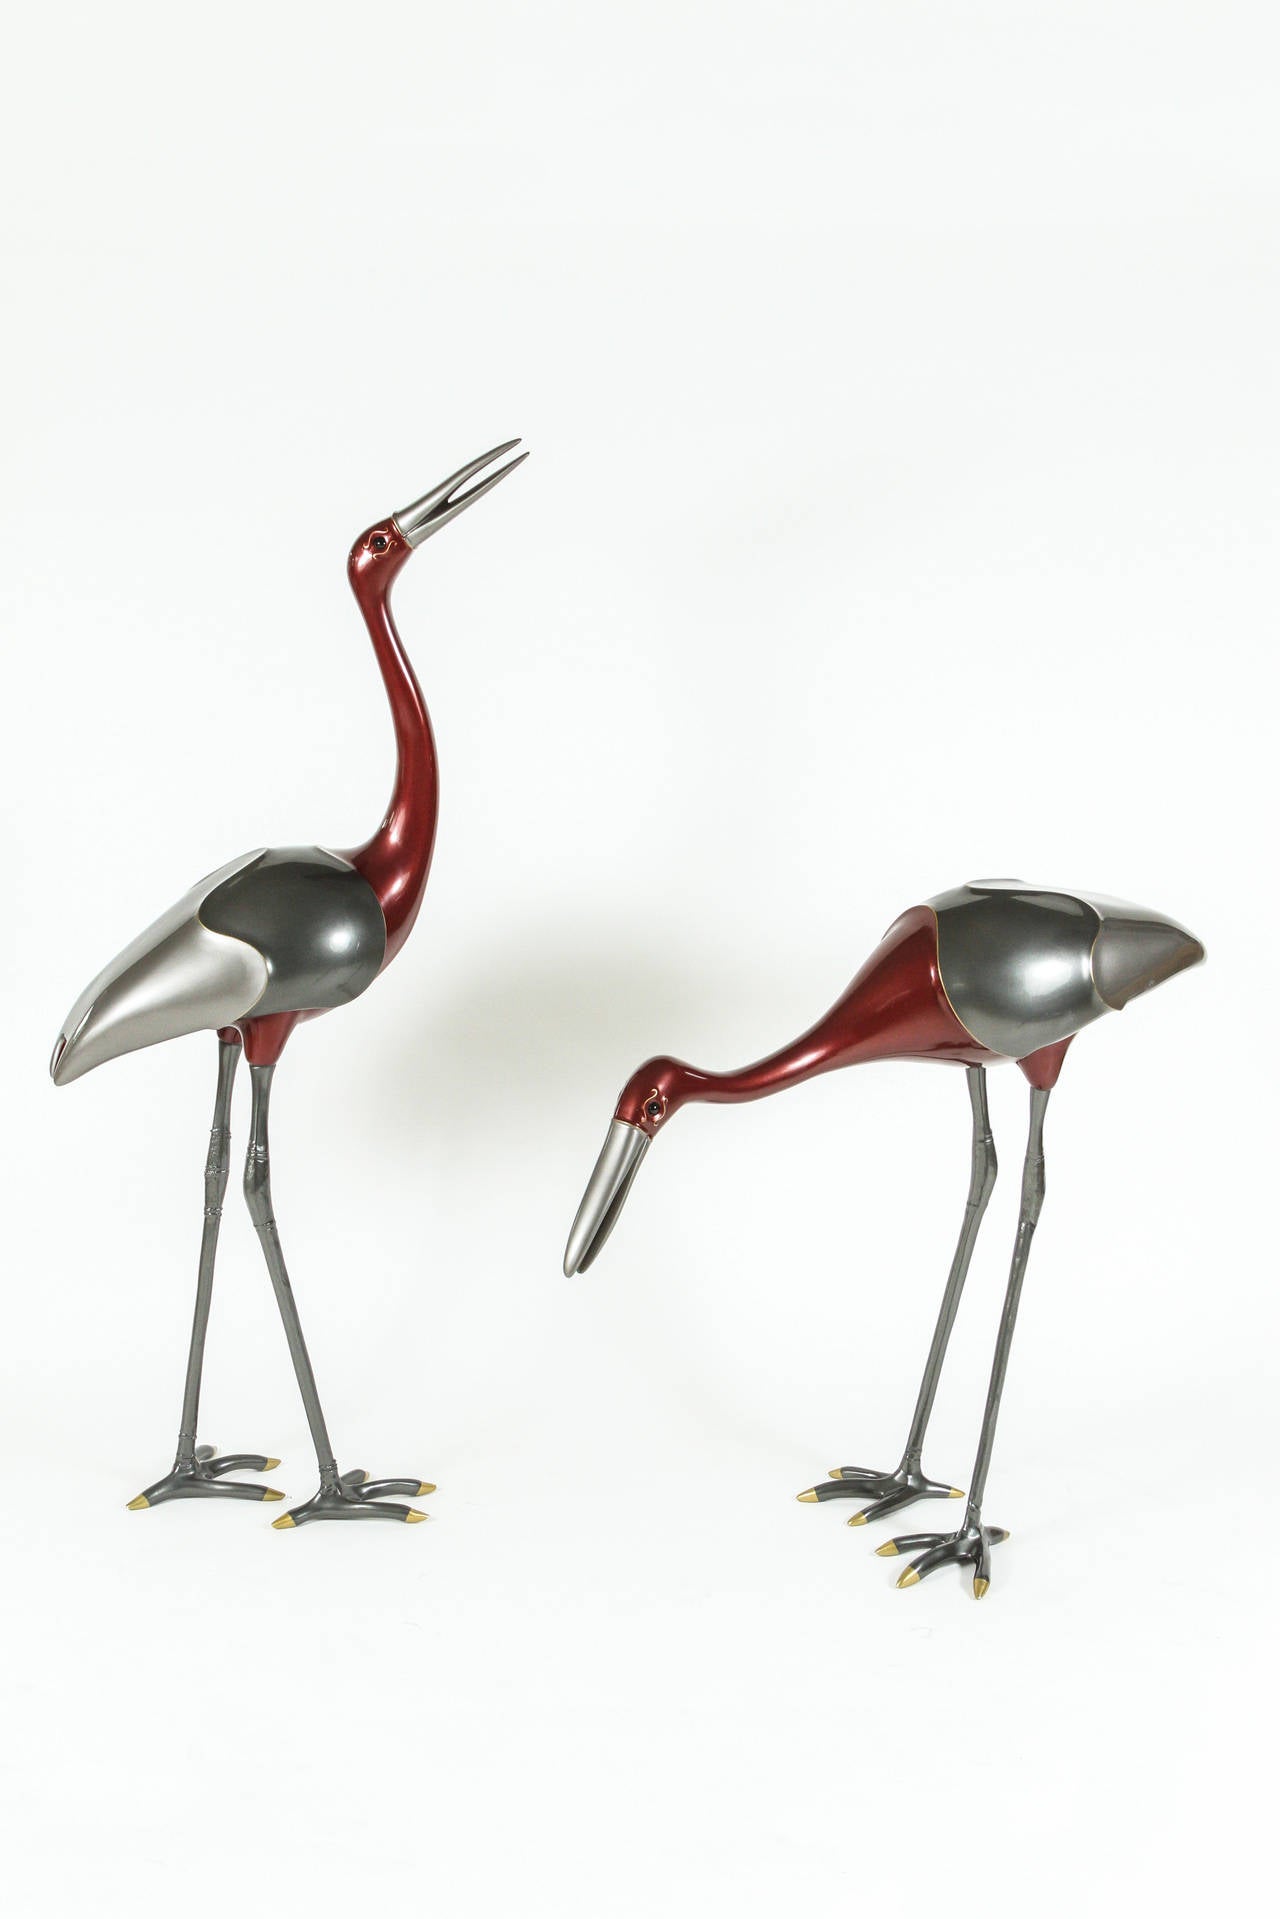 Exceptional pair of cranes in two-toned silver and burgundy enamel with inlaid brass and painted gold details. These pieces have exceptional scale and presence and add a touch of whimsy! Excellent condition with very minor patina to some of the